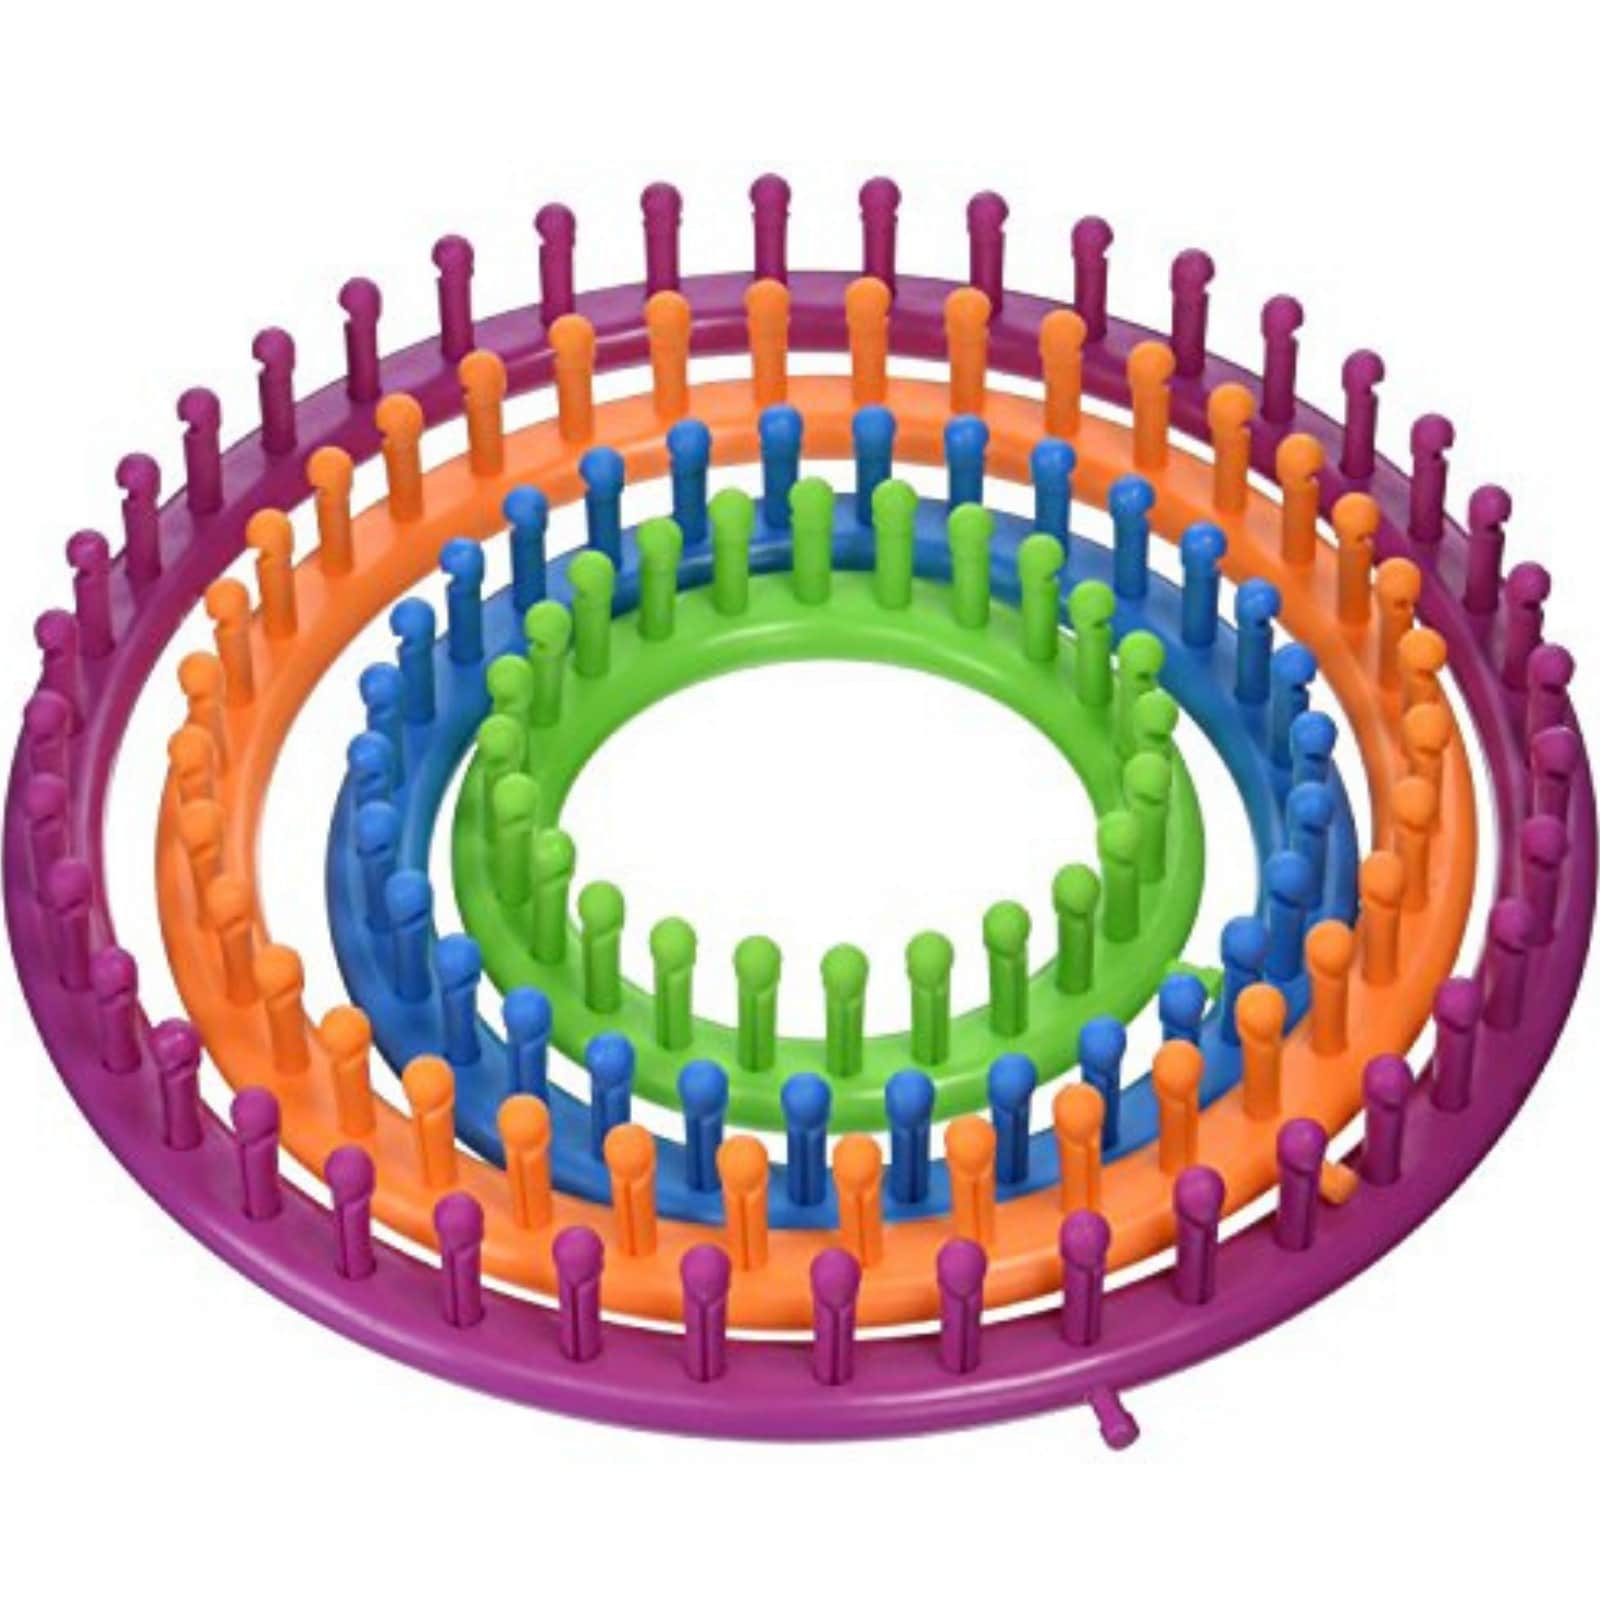 Flower Loom: Round Loom Tool Shapes for Making Circular Flowers and  Details. for Knitting / Crochet / Patchwork Projects. SALE 